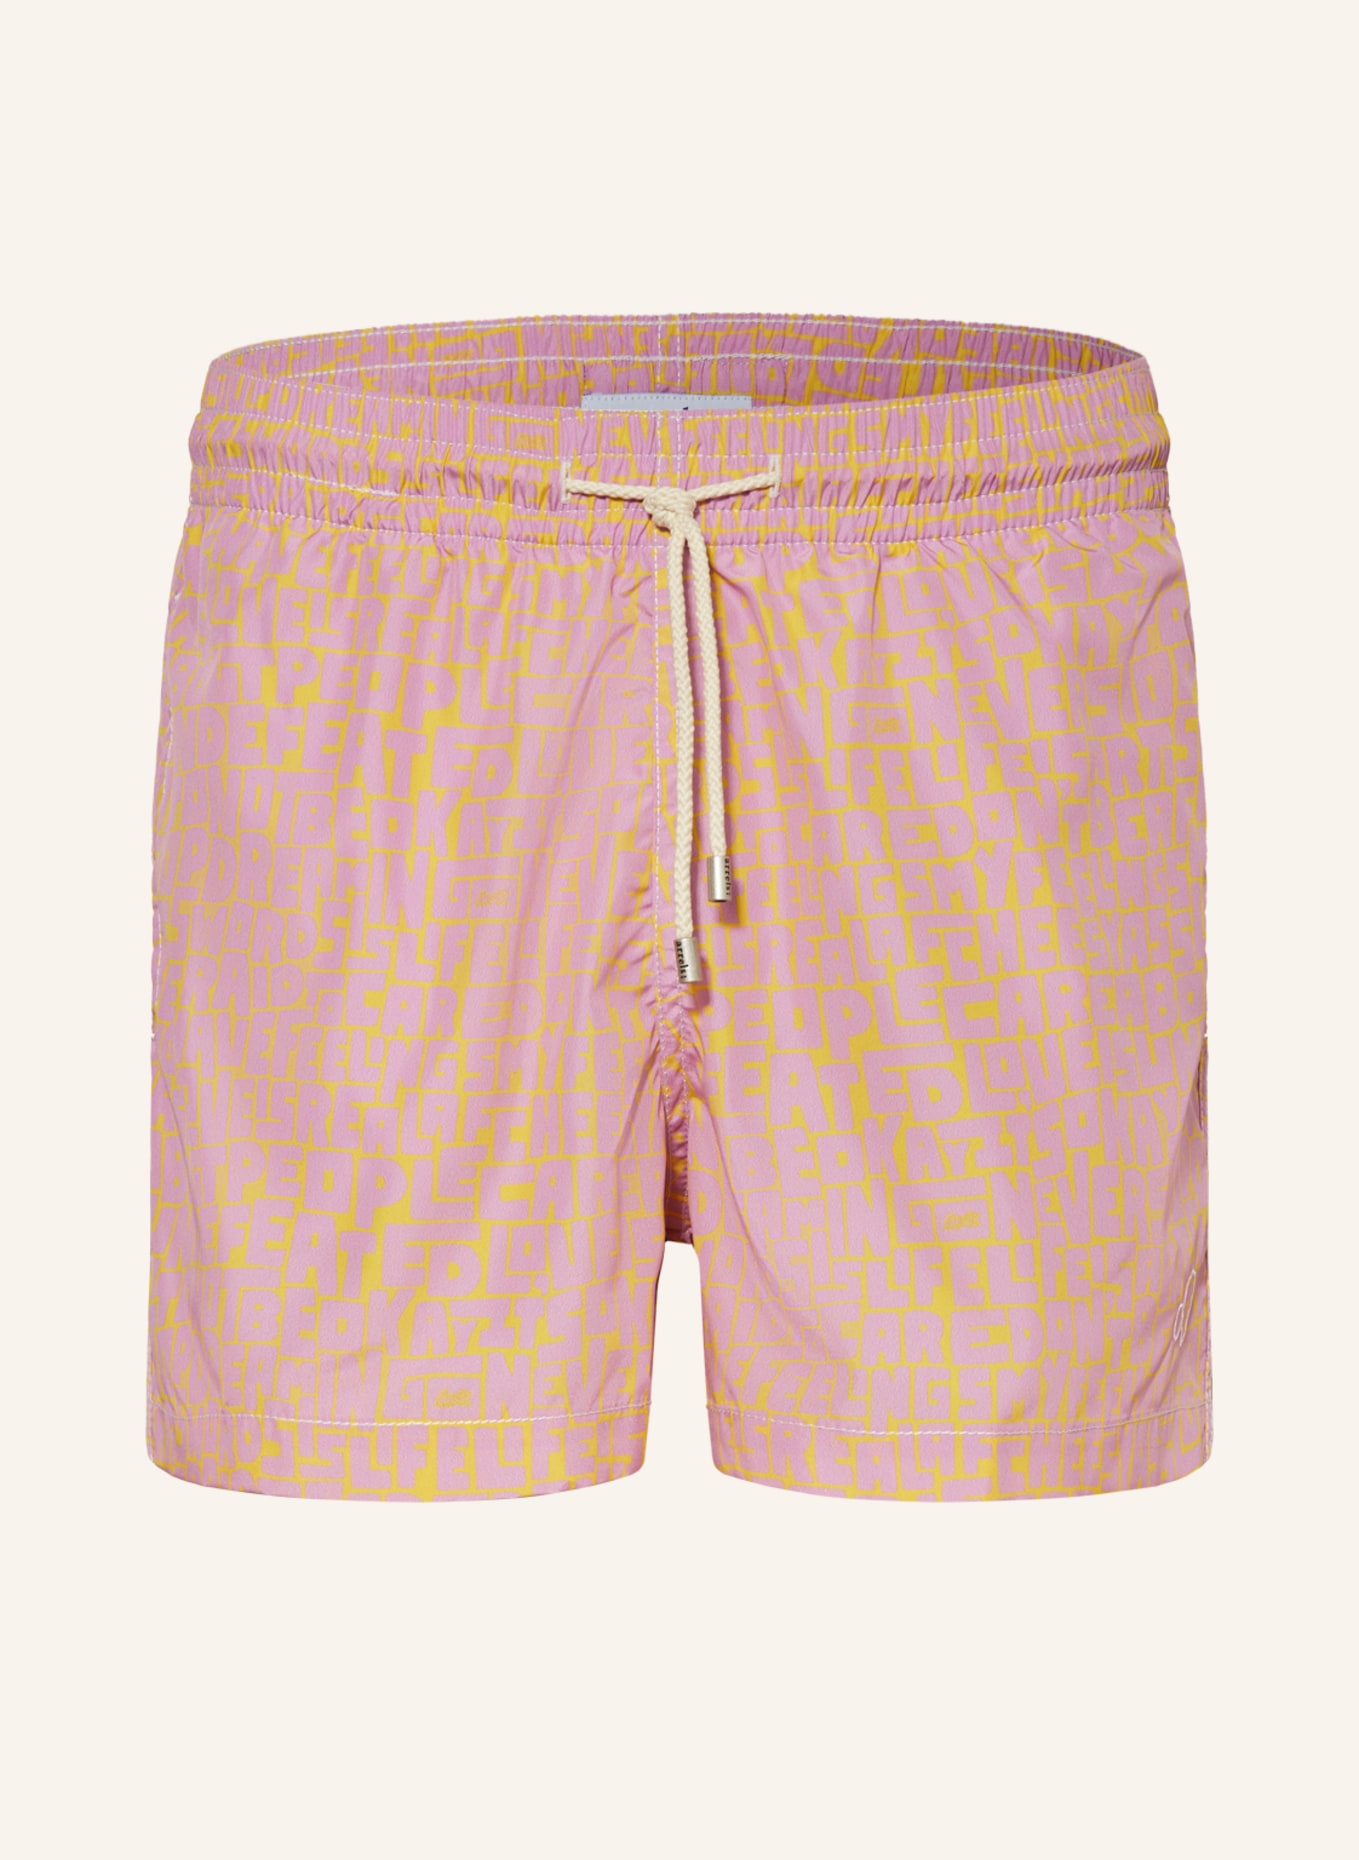 arrels BARCELONA Swim shorts PINK NEVER STOP DREAMING × TIMOTHY GOOD, Color: PINK/ YELLOW (Image 1)